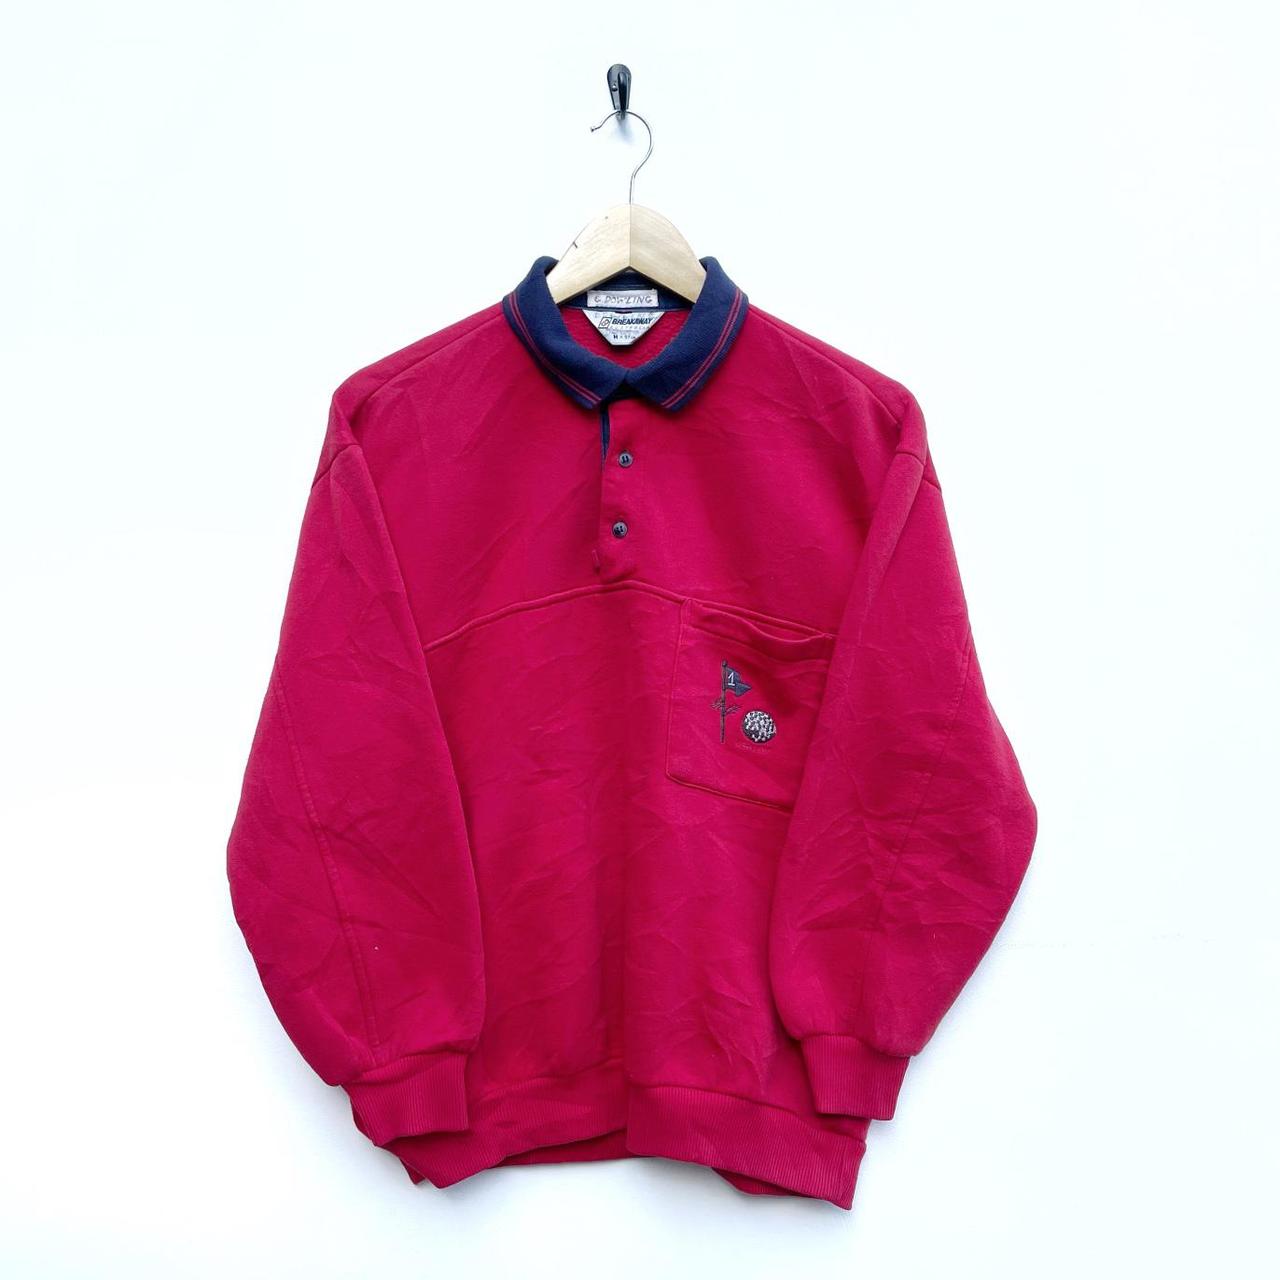 Product Image 1 - Vintage 90s collared sweatshirt, features